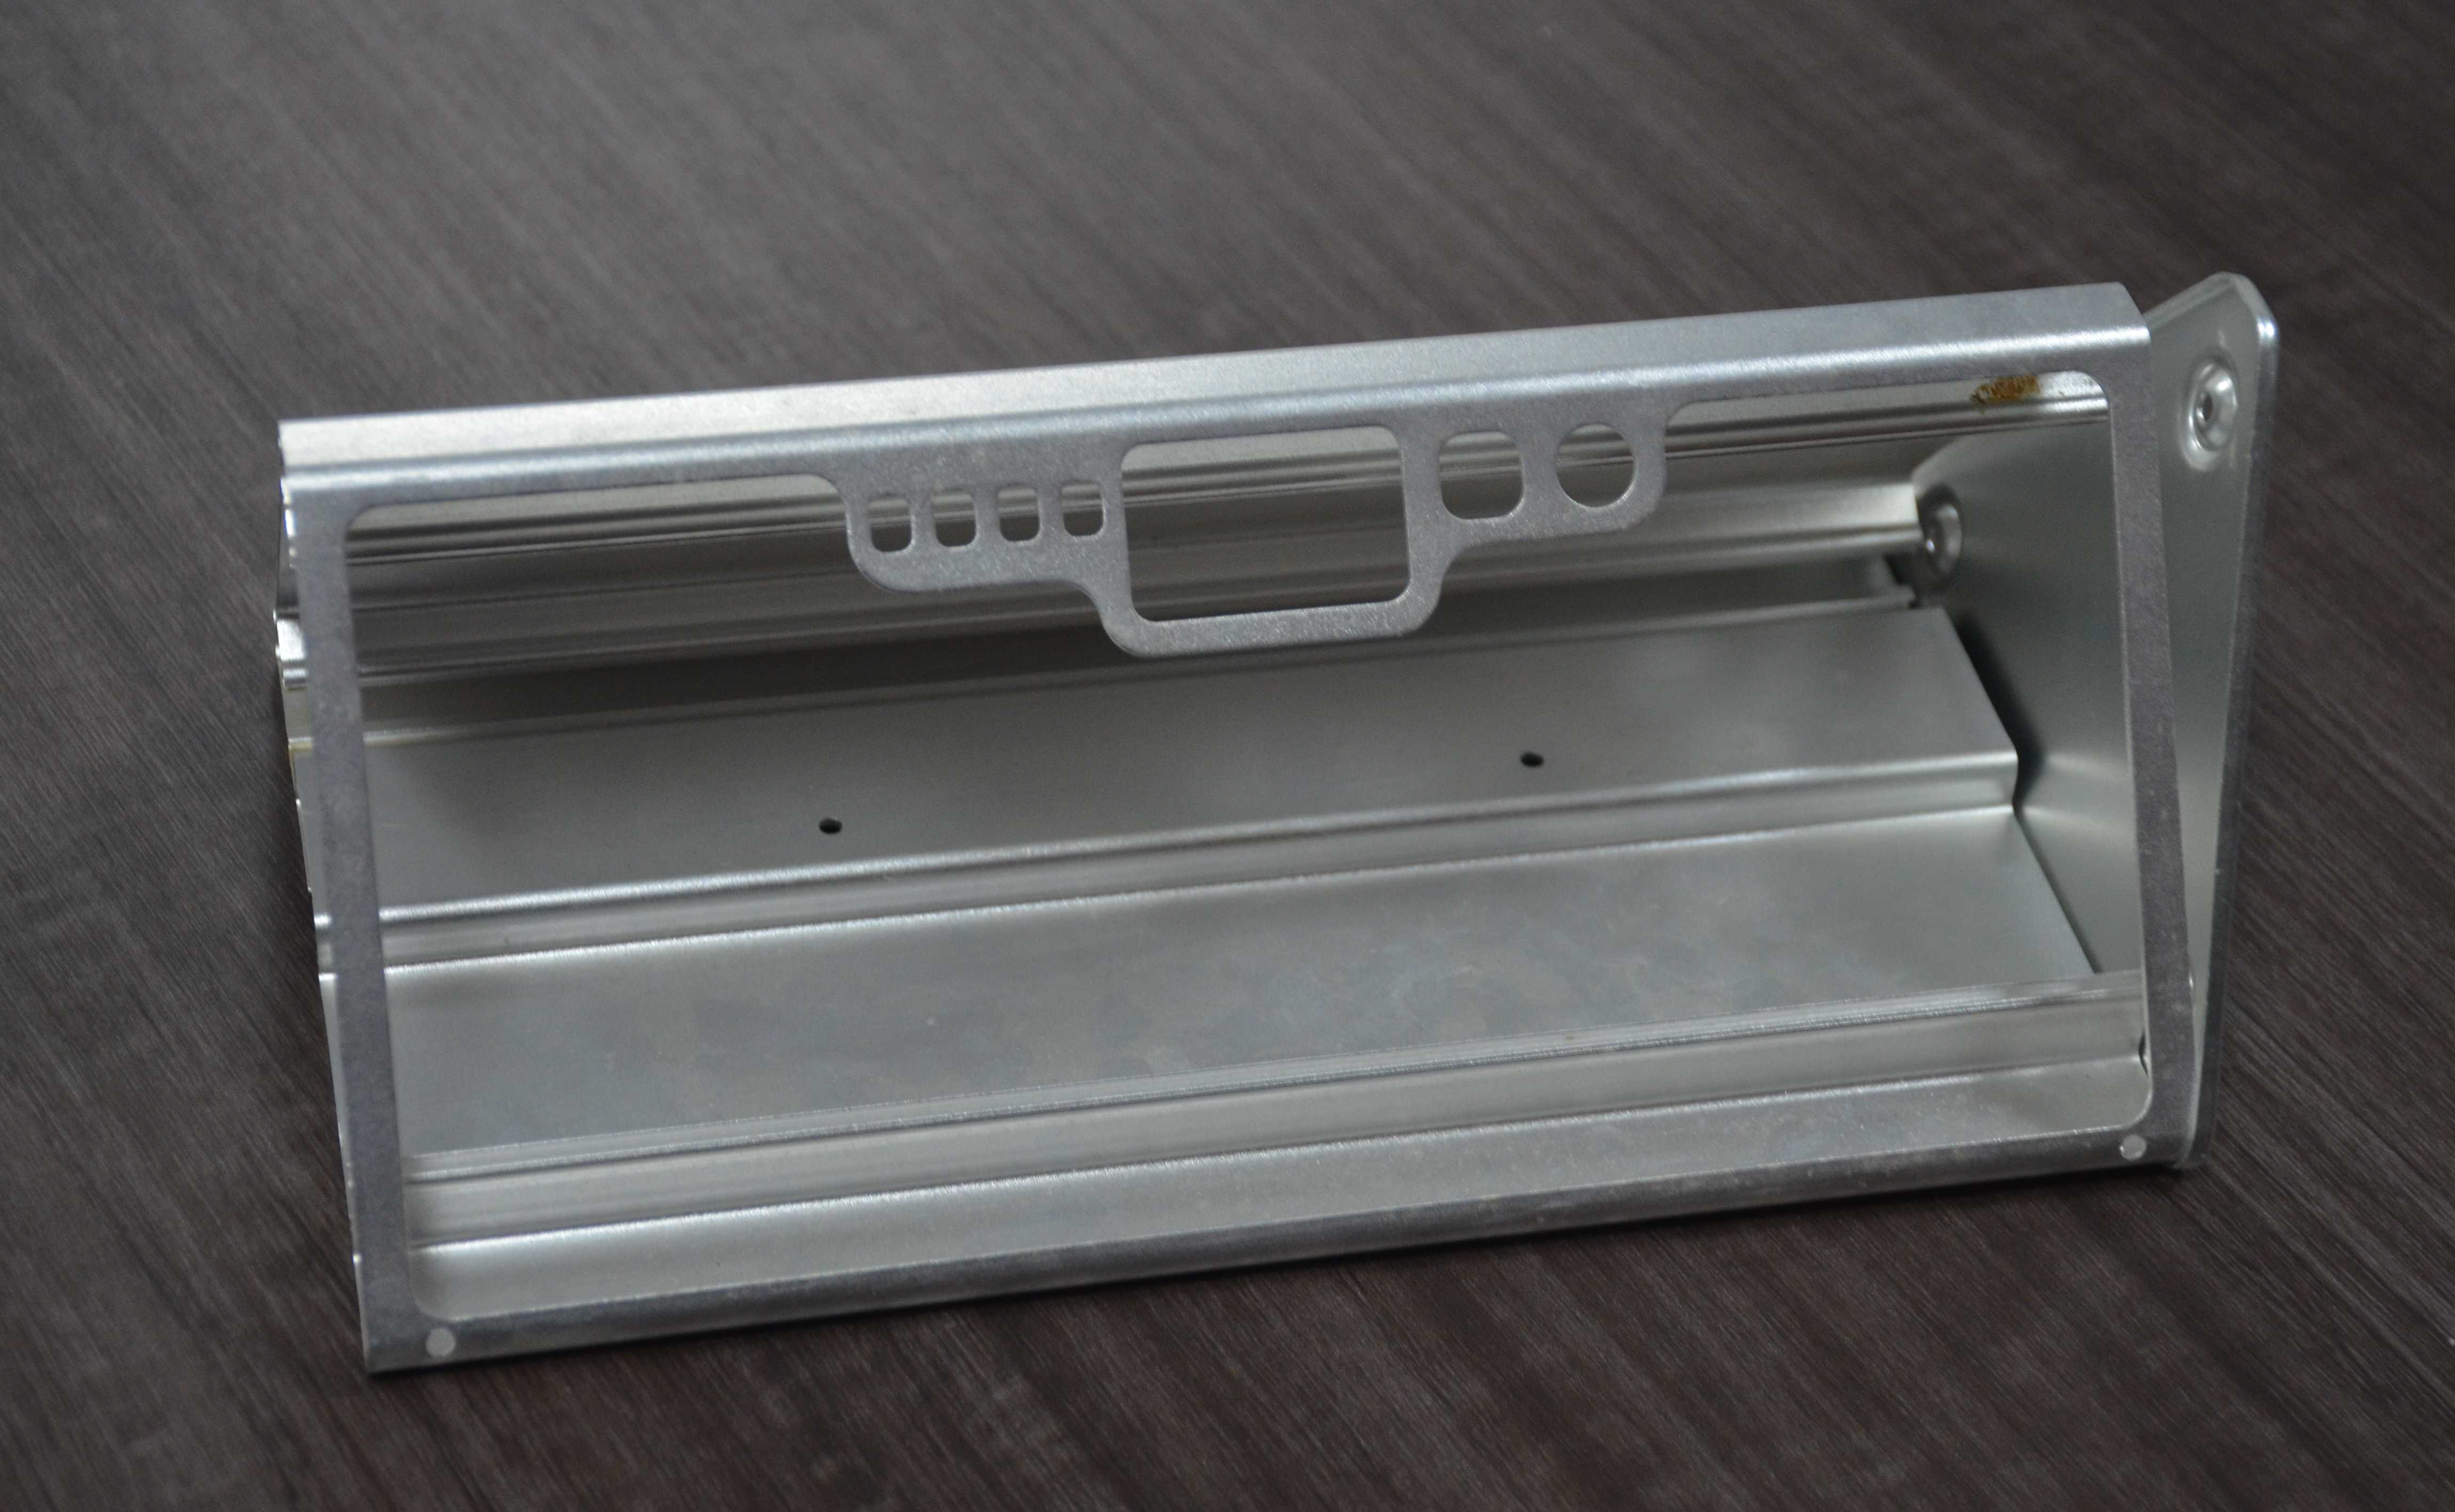 Aluminum case of the battery